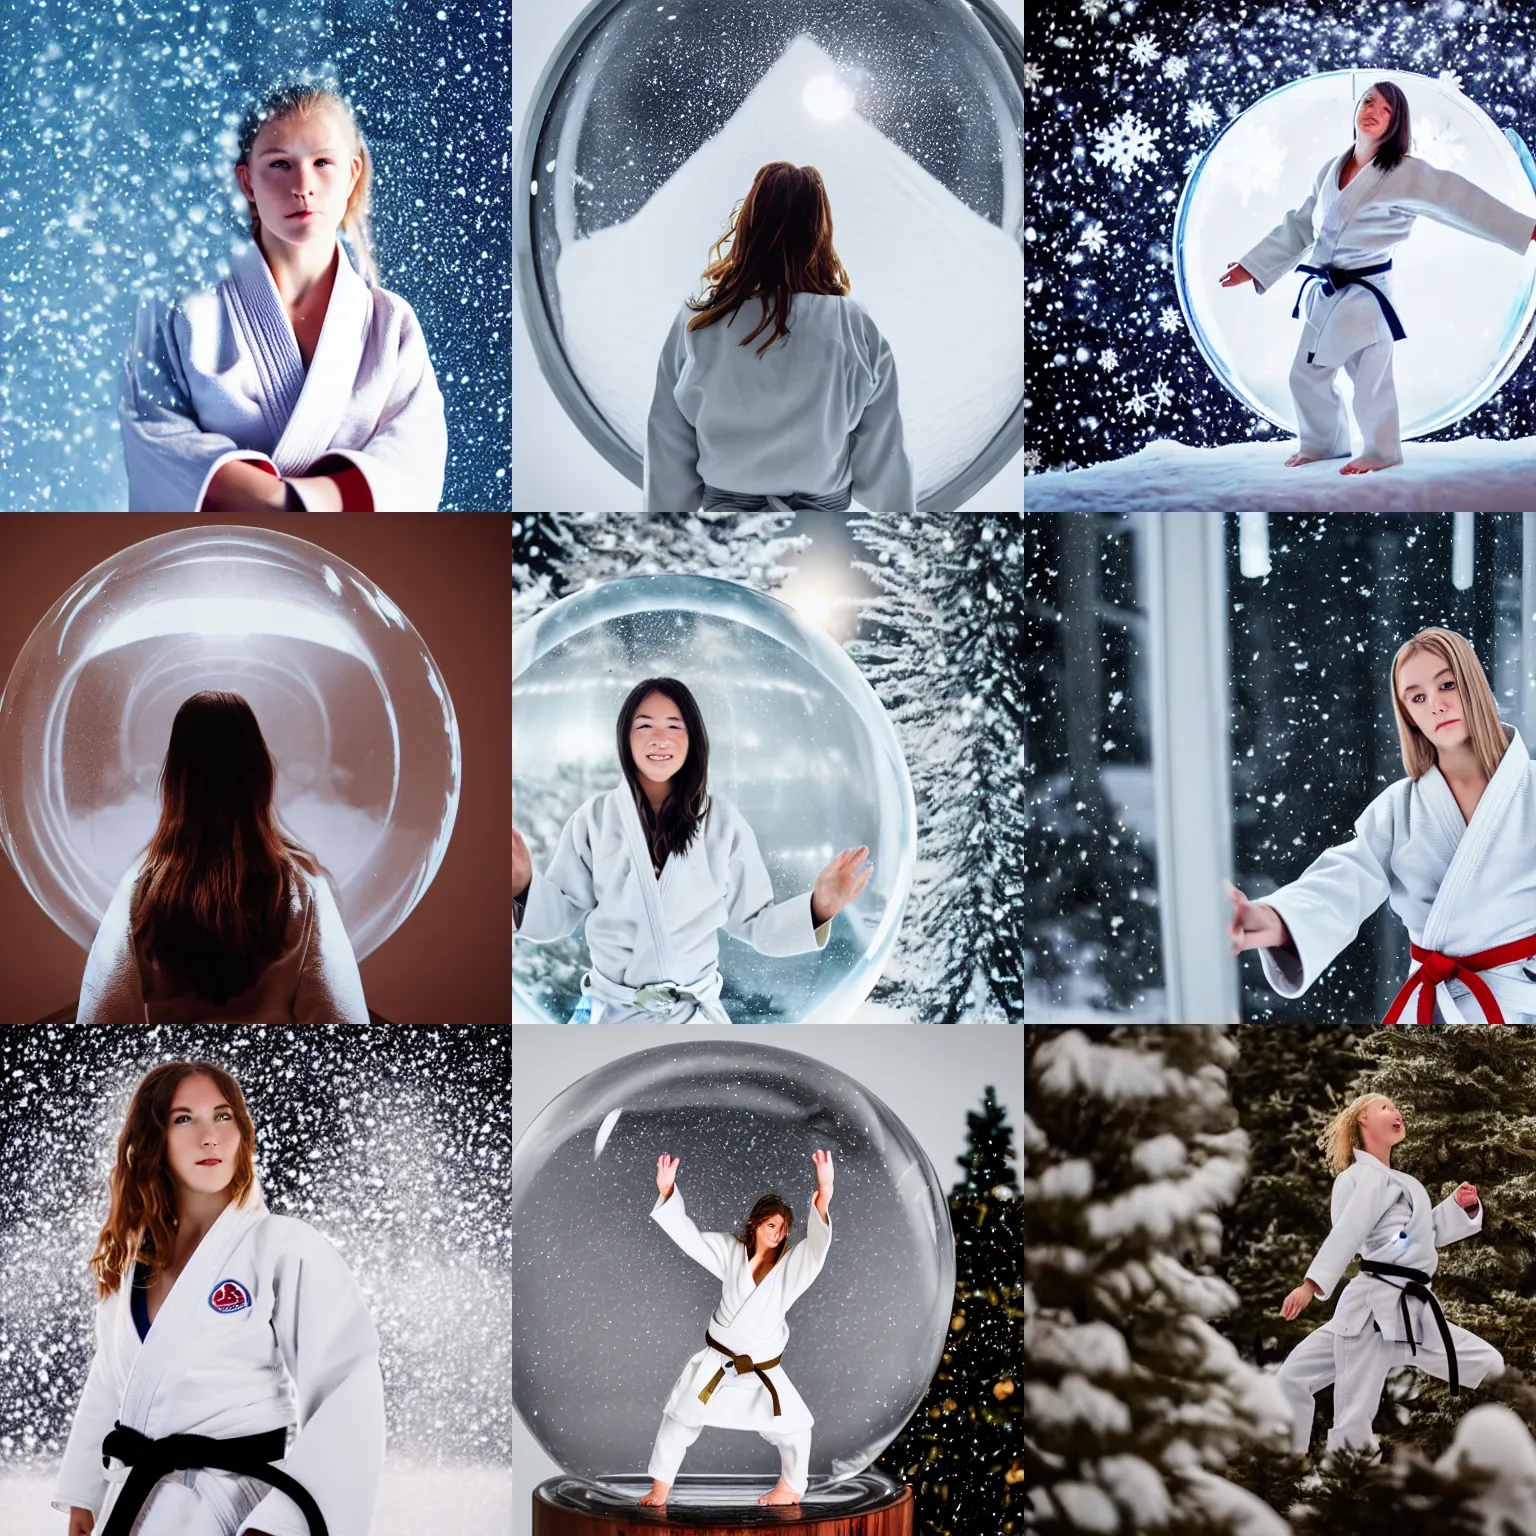 Prompt: Young white judo woman wearing a white gi, standing inside a giant snowglobe on a shelf, macro photography